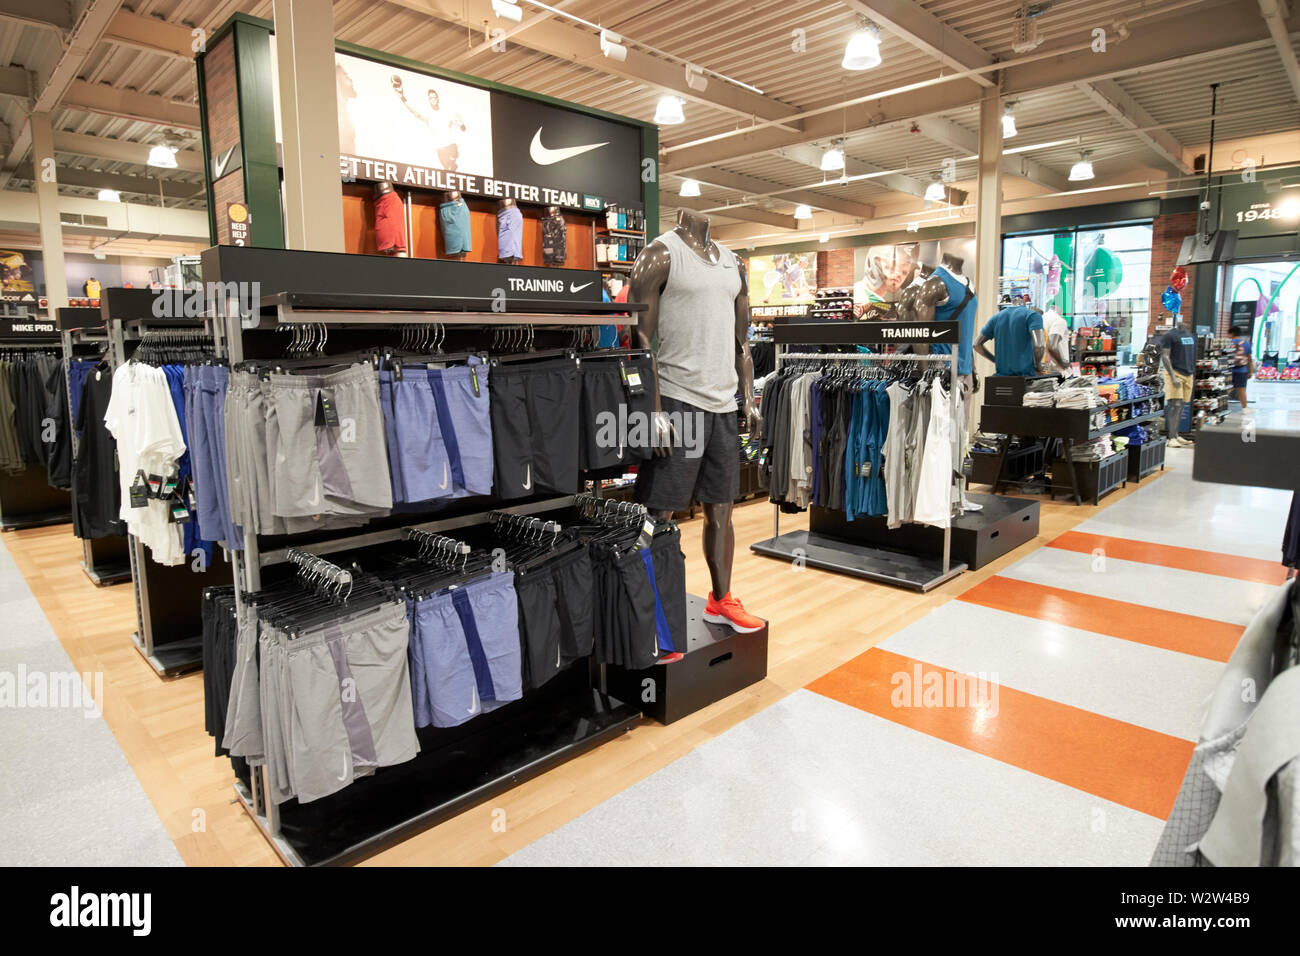 nike athletics clothing in a sports store in a shopping mall orlando  Florida USA United States of America Stock Photo - Alamy